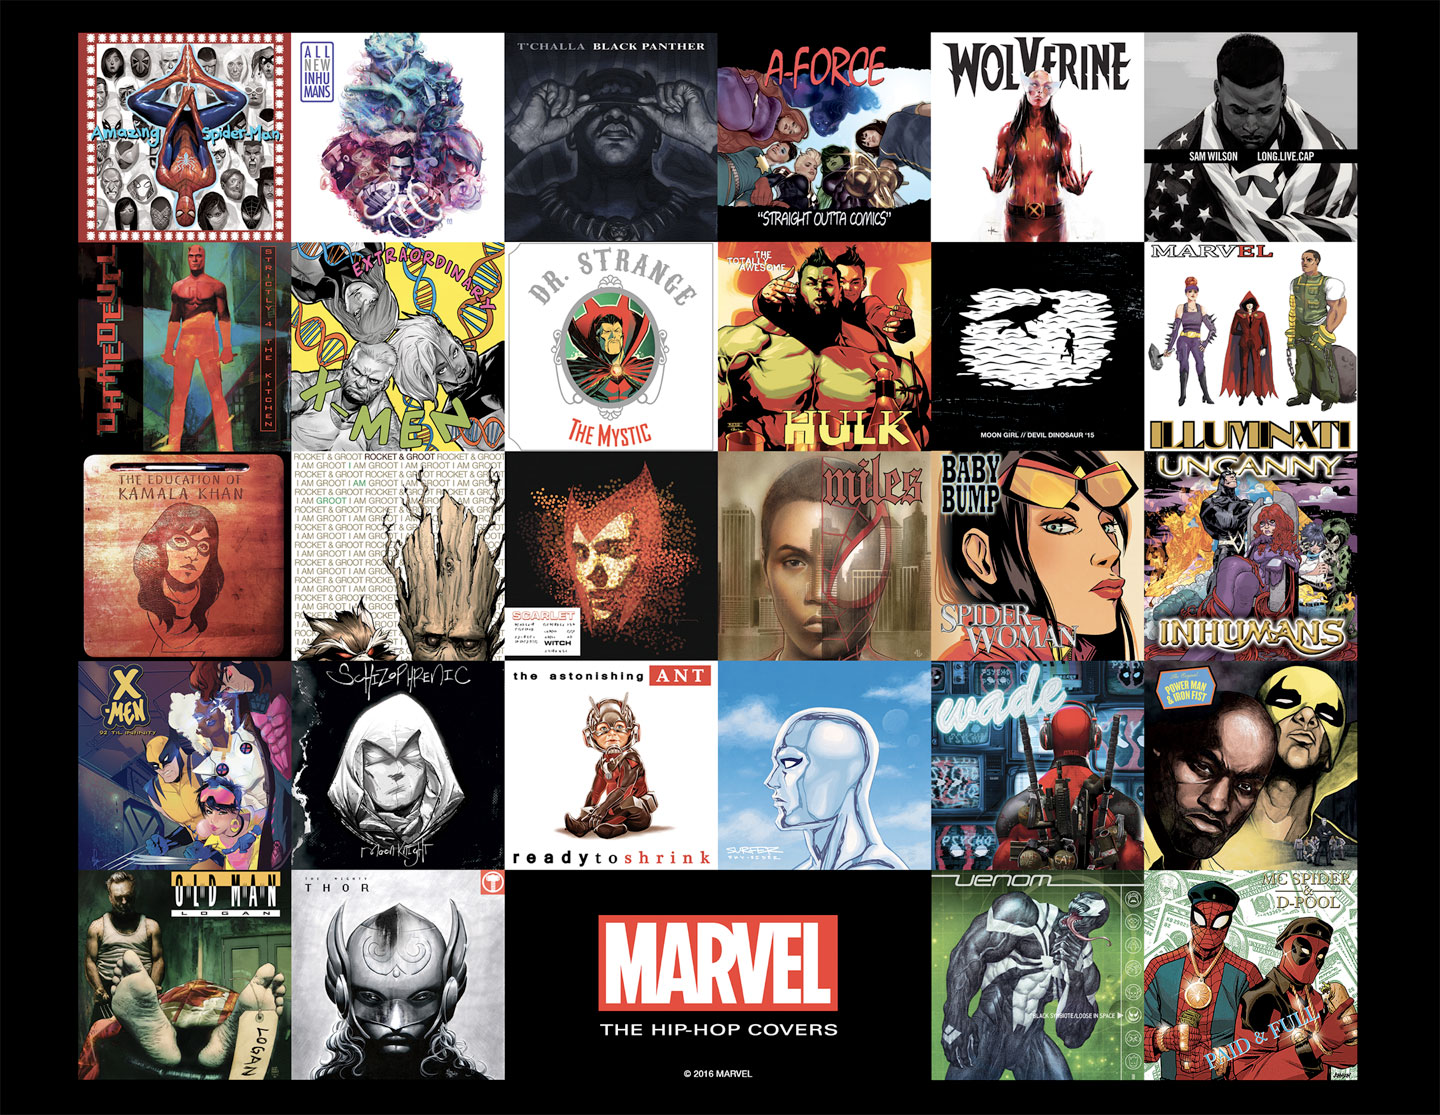 Marvel_The_Hip-Hop_Covers_Poster.jpg